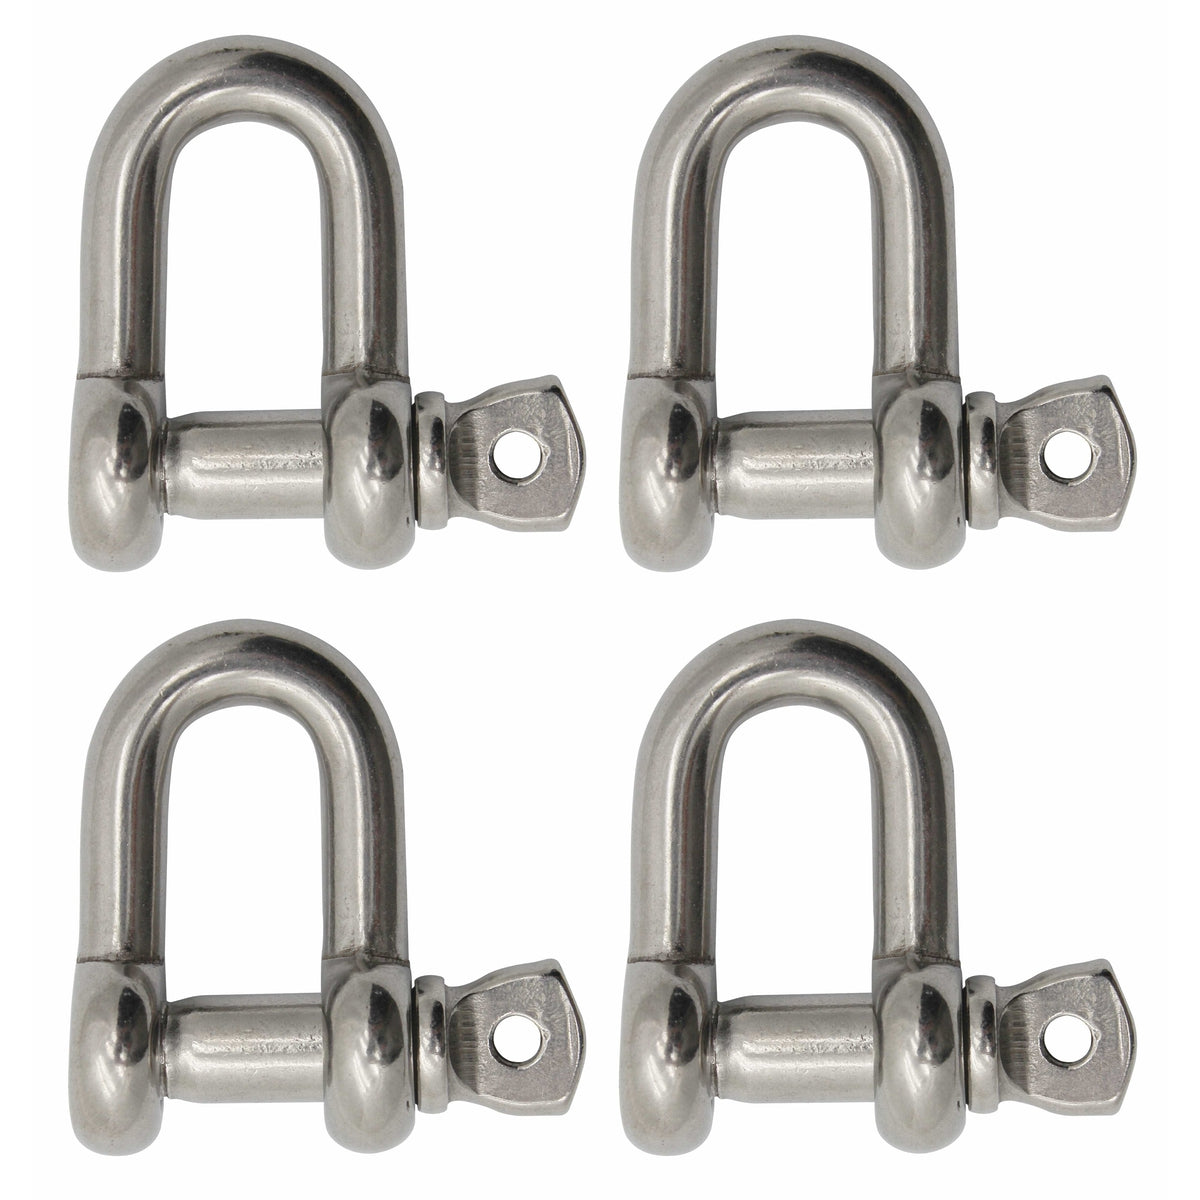 Extreme Max BoatTector SS Chain Shackle 5/8" 4-pk #3006.8276.4